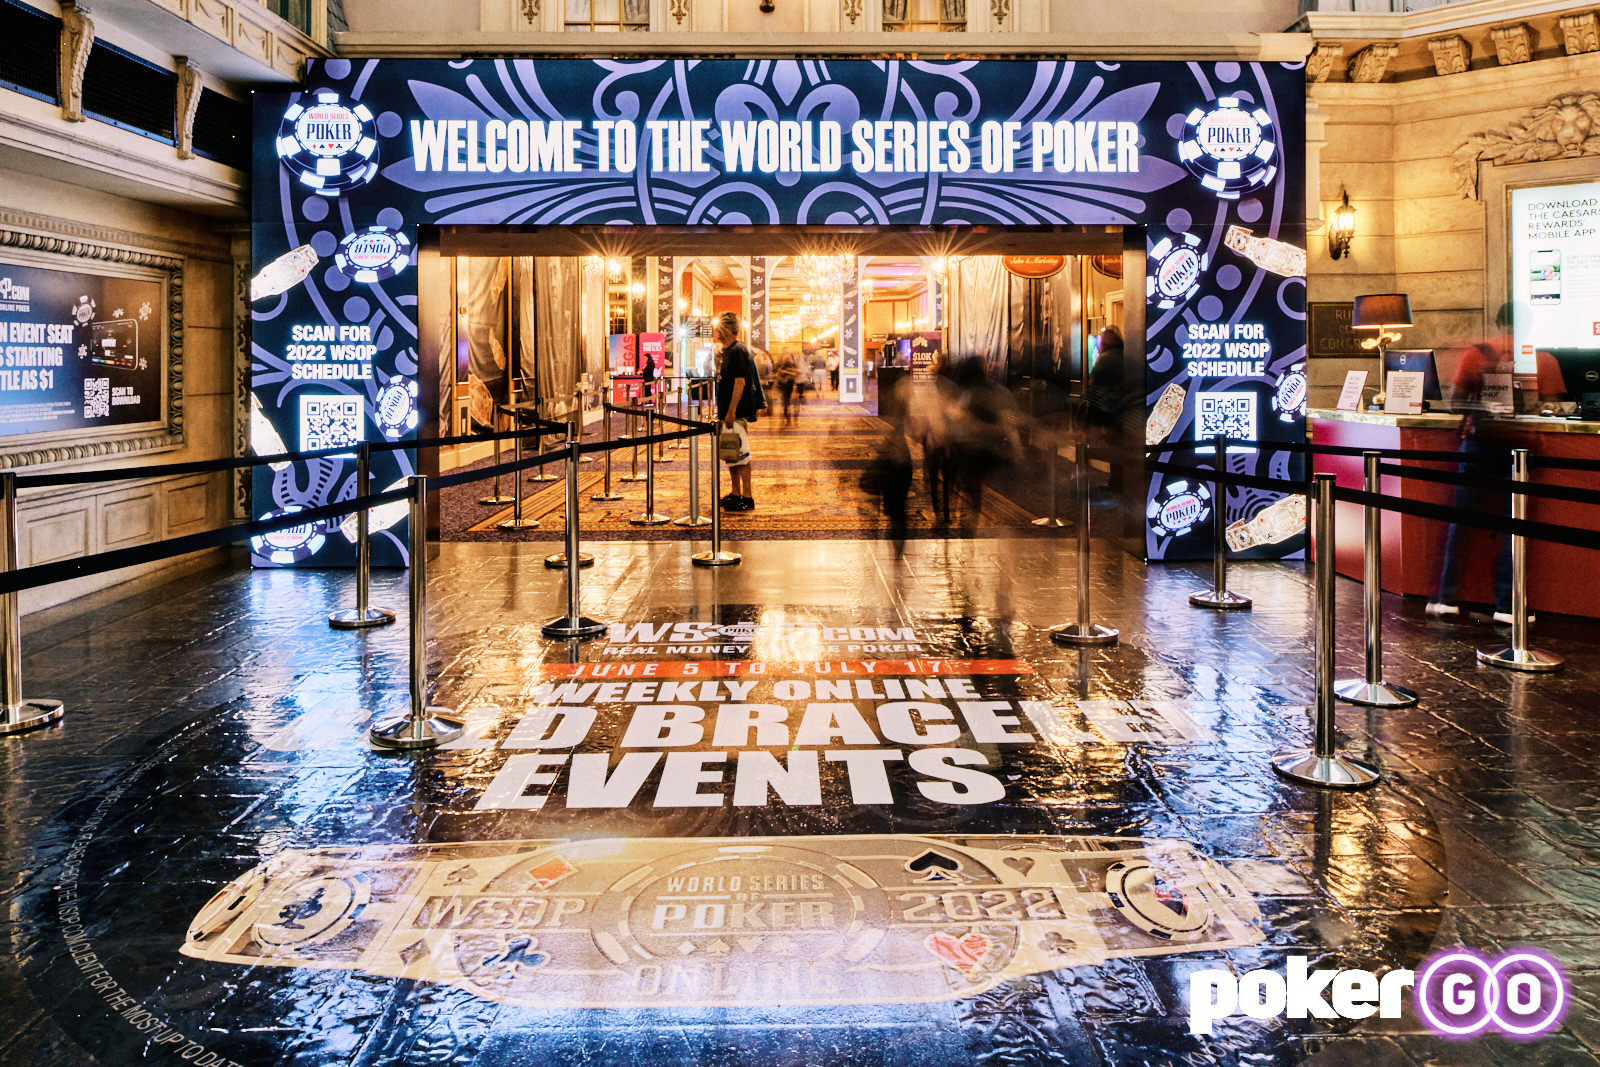 The Wait Is Over! The WSOP 2023 Starts Today! Welcome to the Poker Mecca: WSOP 2023 Begins at Paris Las Vegas!